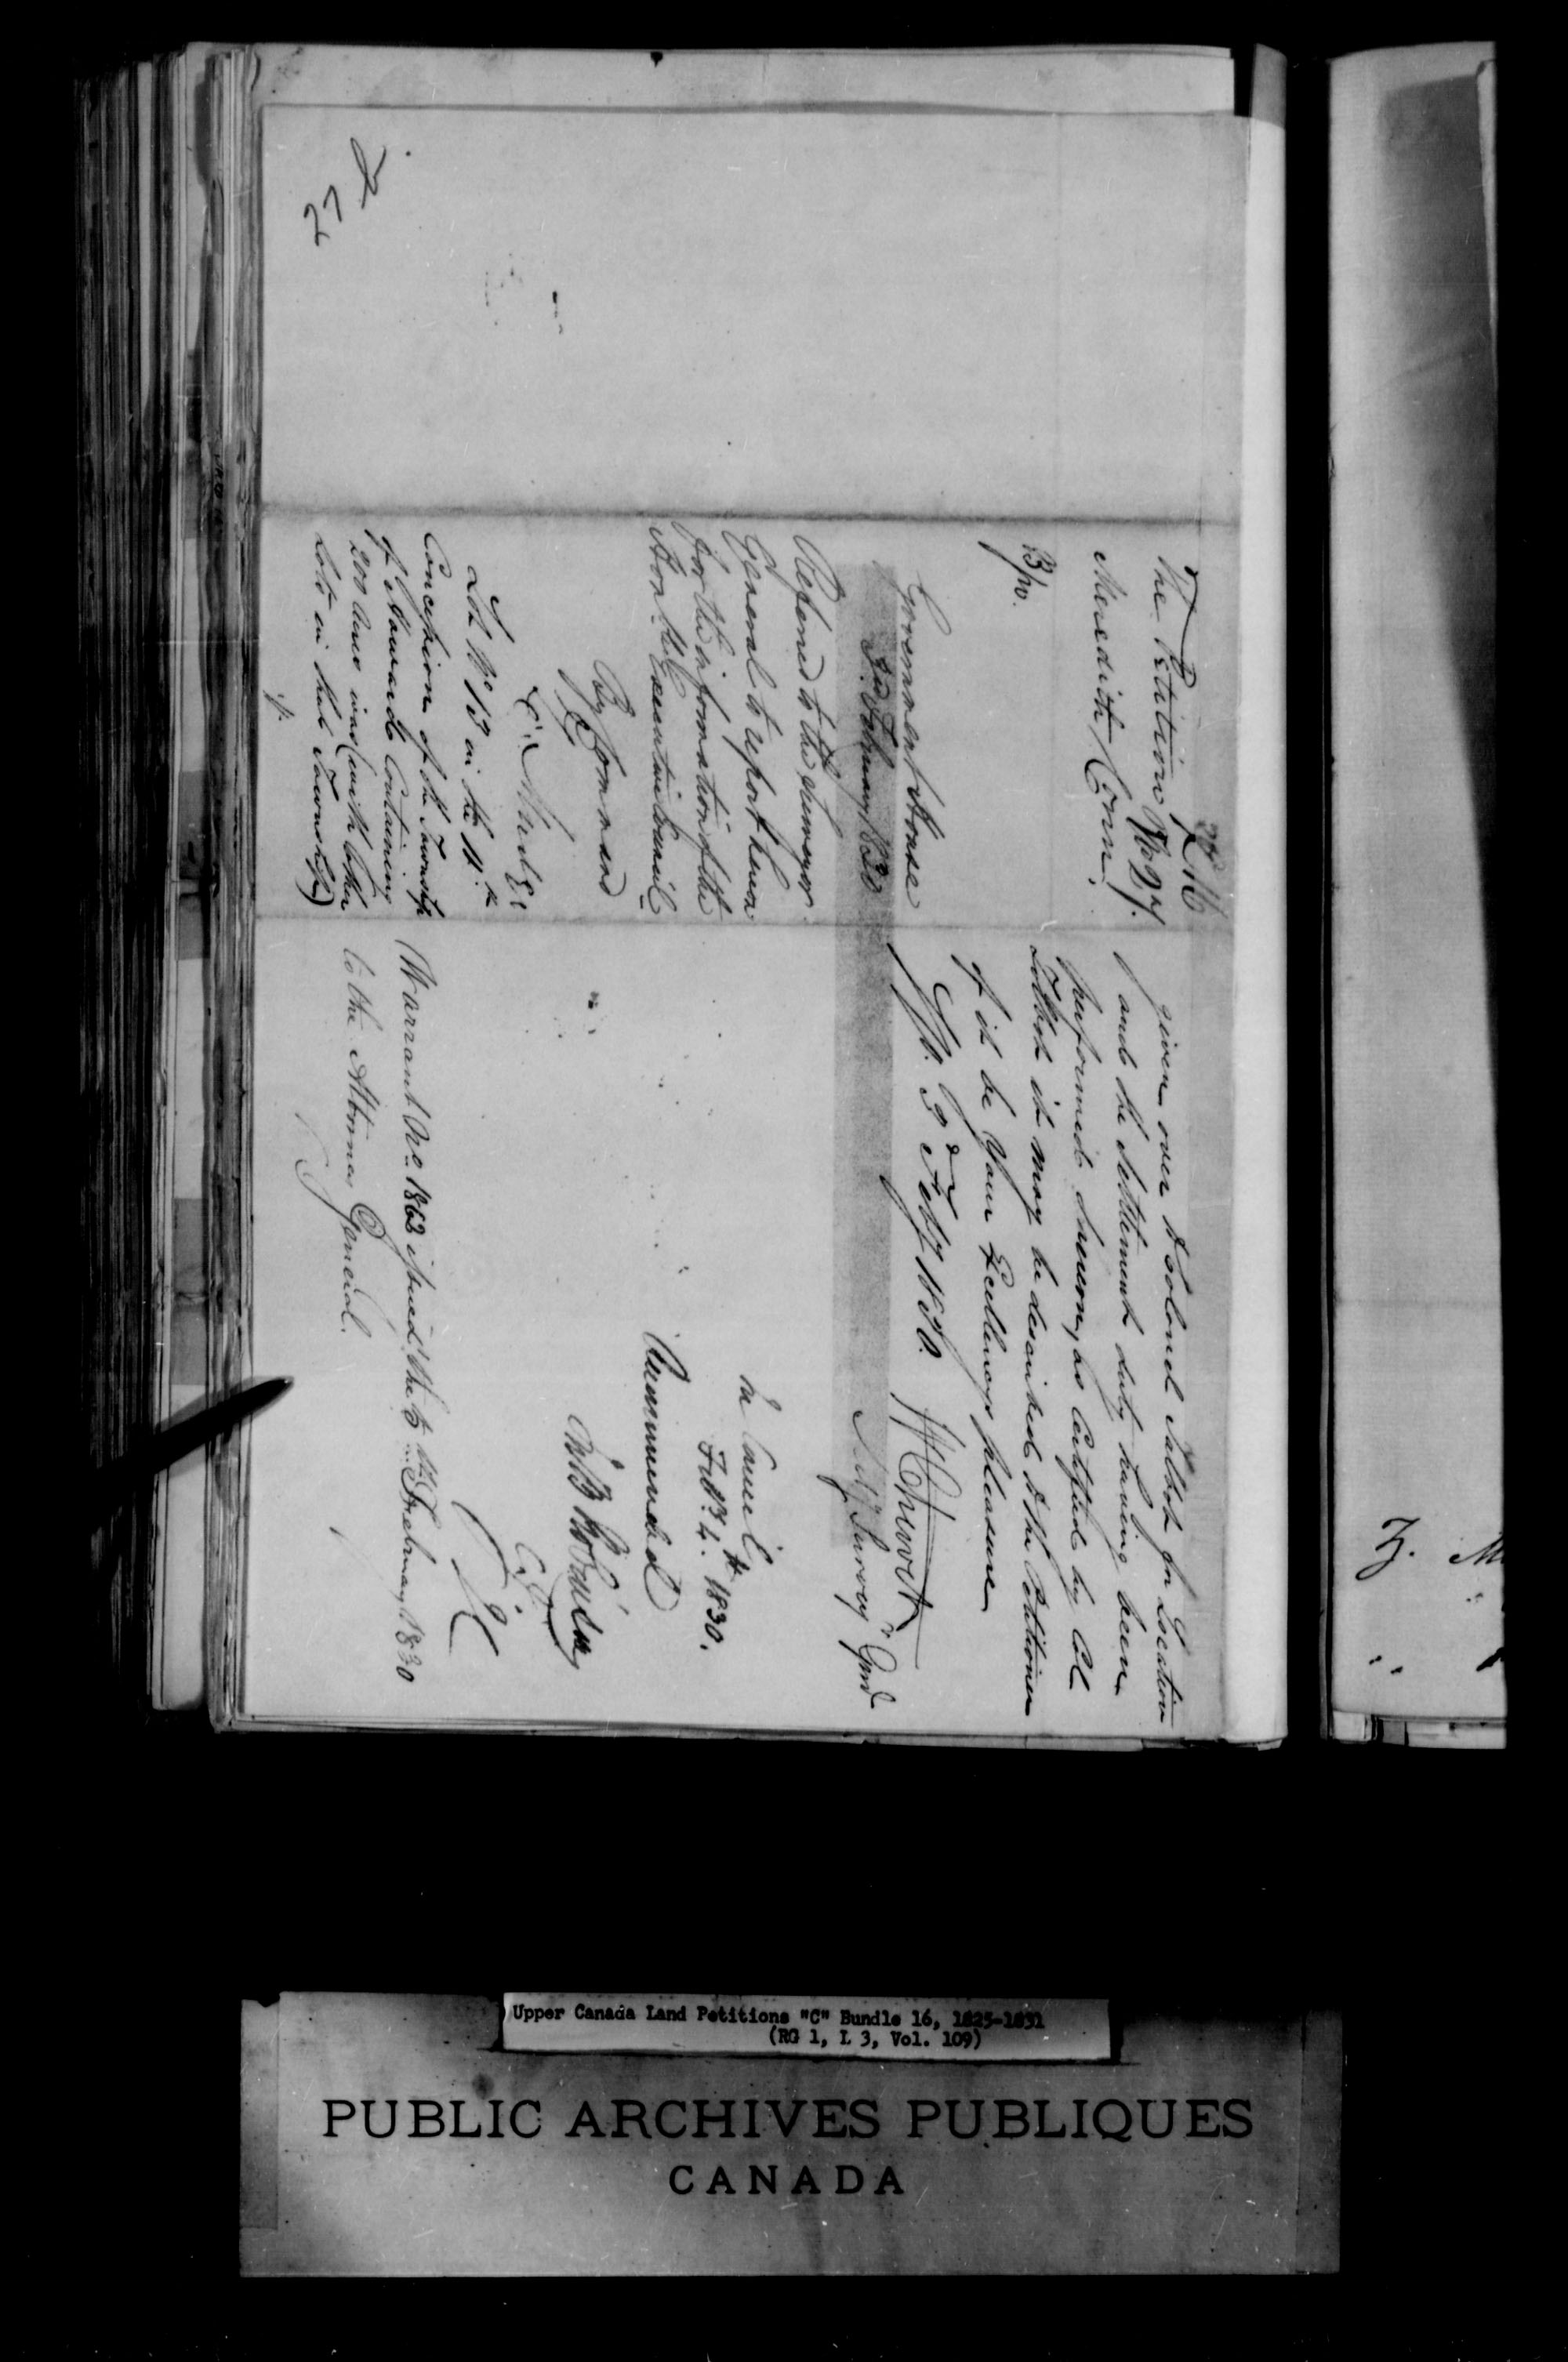 Title: Upper Canada Land Petitions (1763-1865) - Mikan Number: 205131 - Microform: c-1725